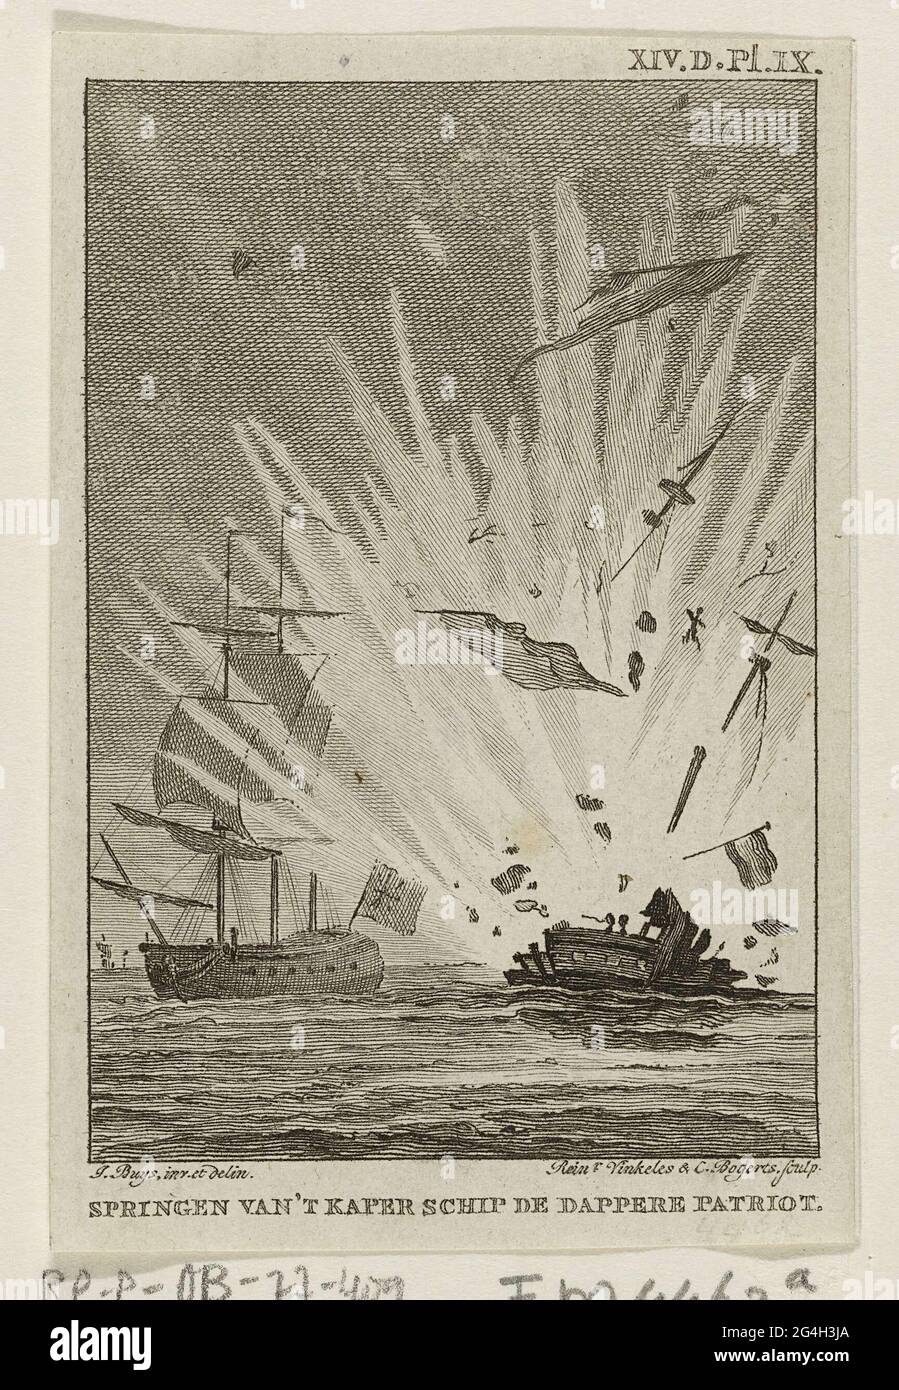 . In the air of the Haagse Harder the 'brave patriot' in a fight with the English ship the 'Camelon', on August 14, 1781. Signature at the top right: XIV.d.pl.ix. Stock Photo